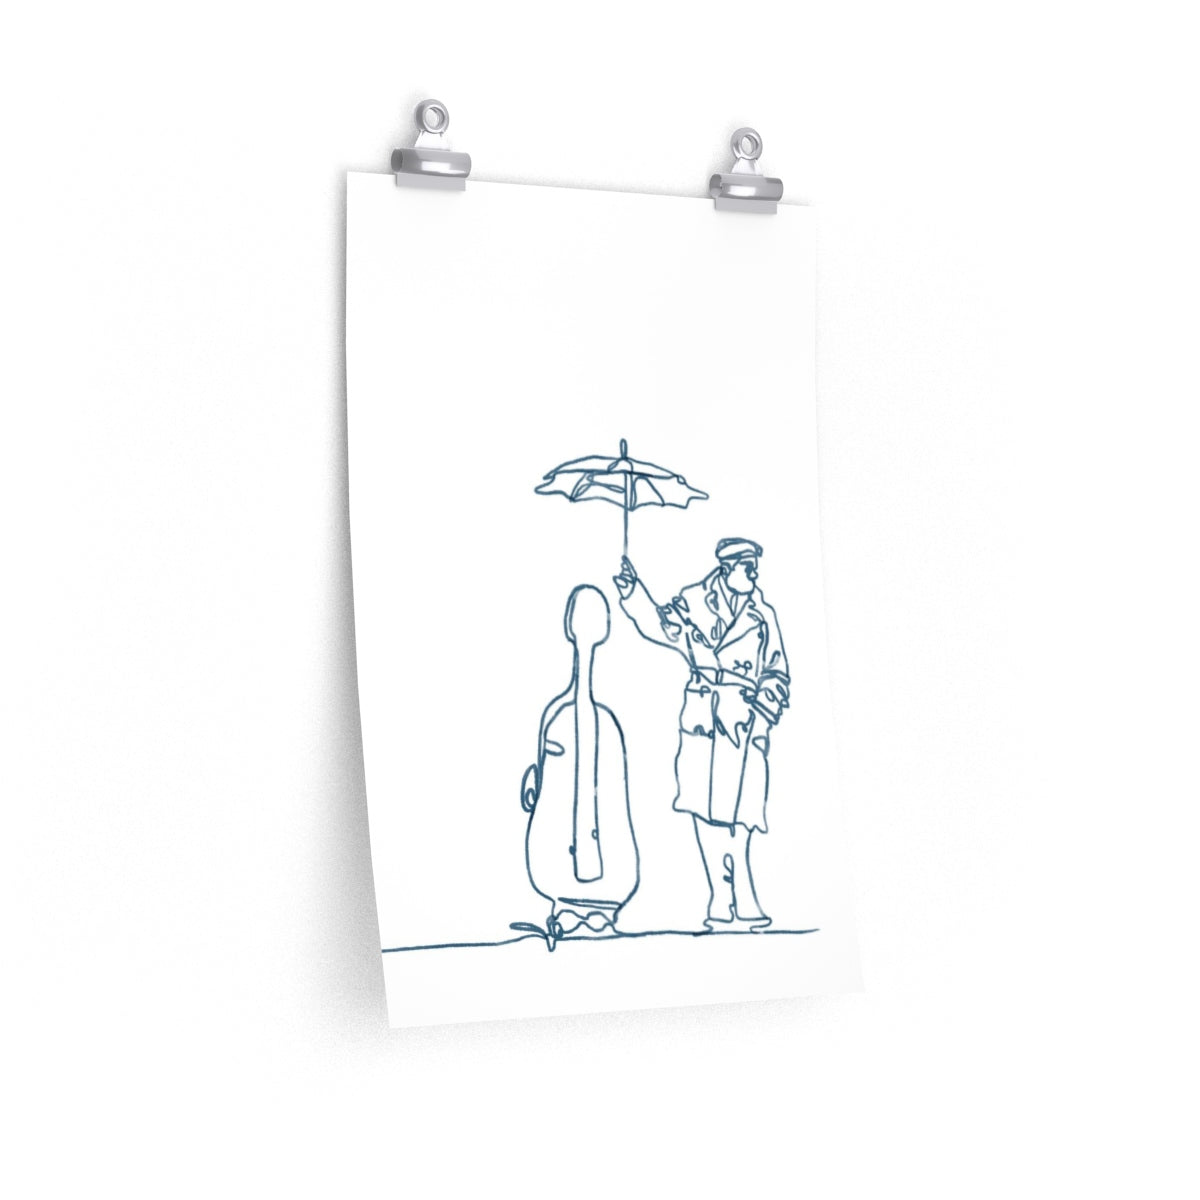 Man Holding An Umbrella For His Cello | Print | Poster | Premium Matte vertical posters - EGLOOP